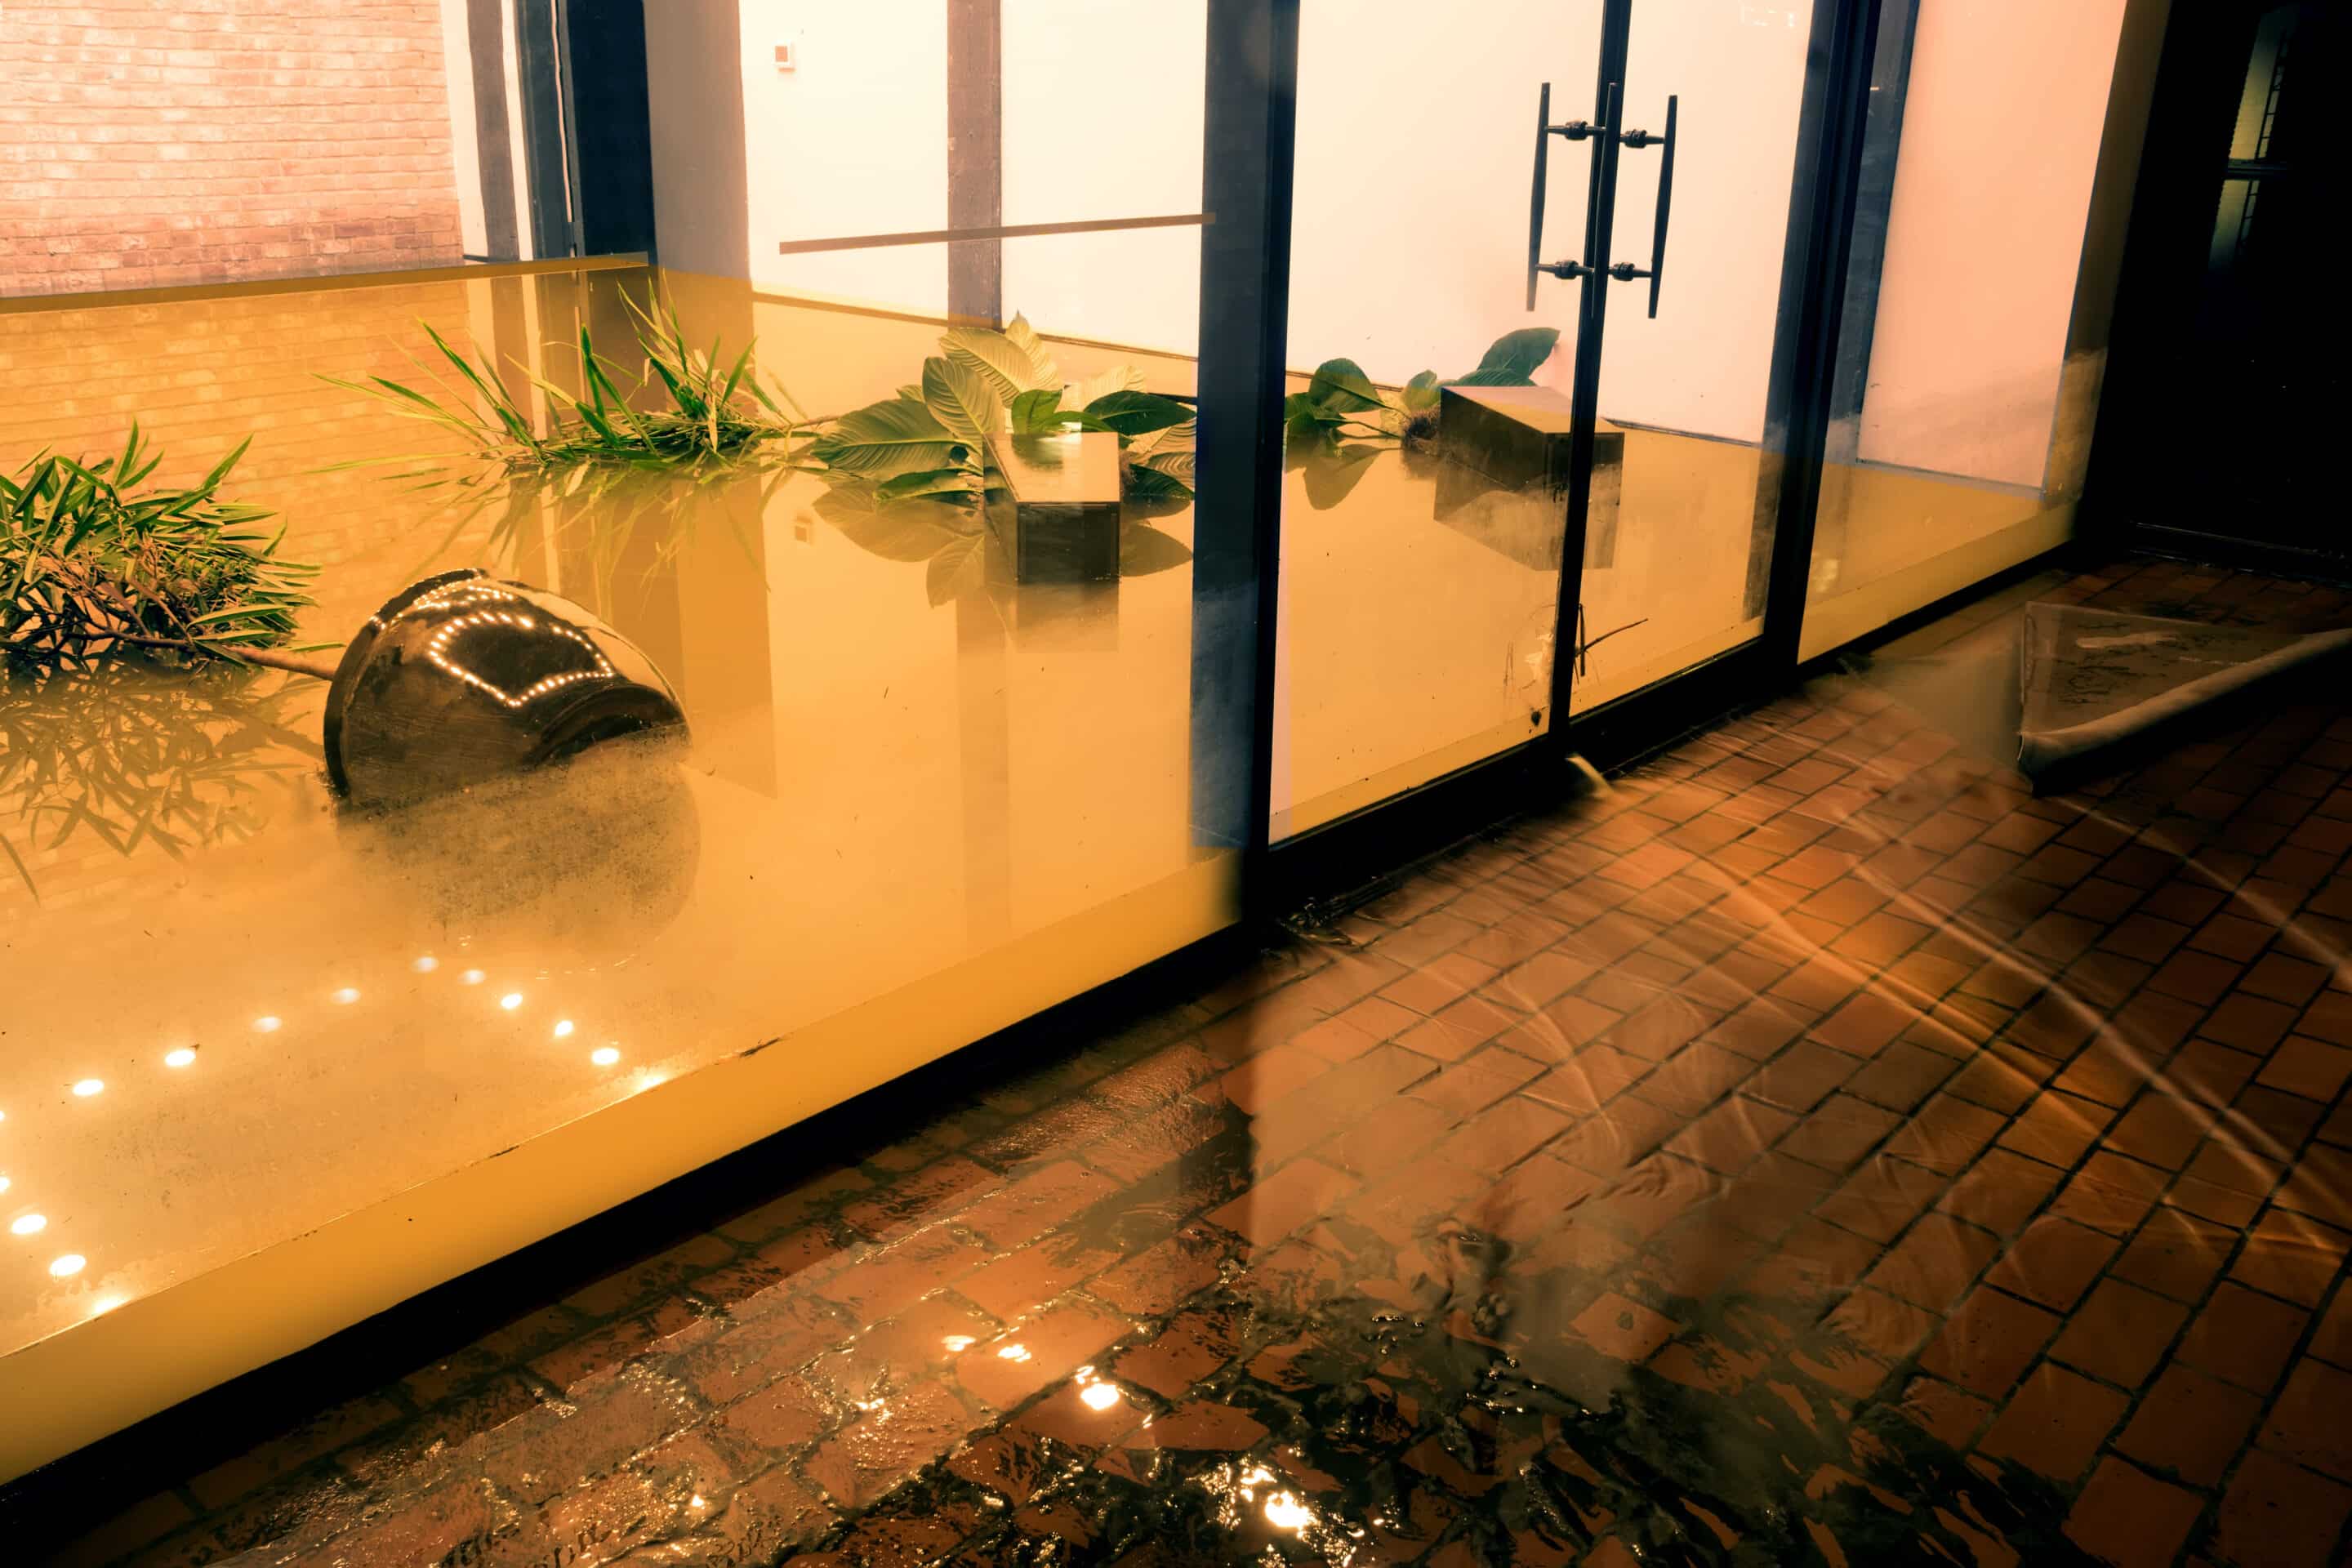 Flooded commercial property with water covering the floor and plants inside, emphasizing the need for updated flood insurance changes in 2024.